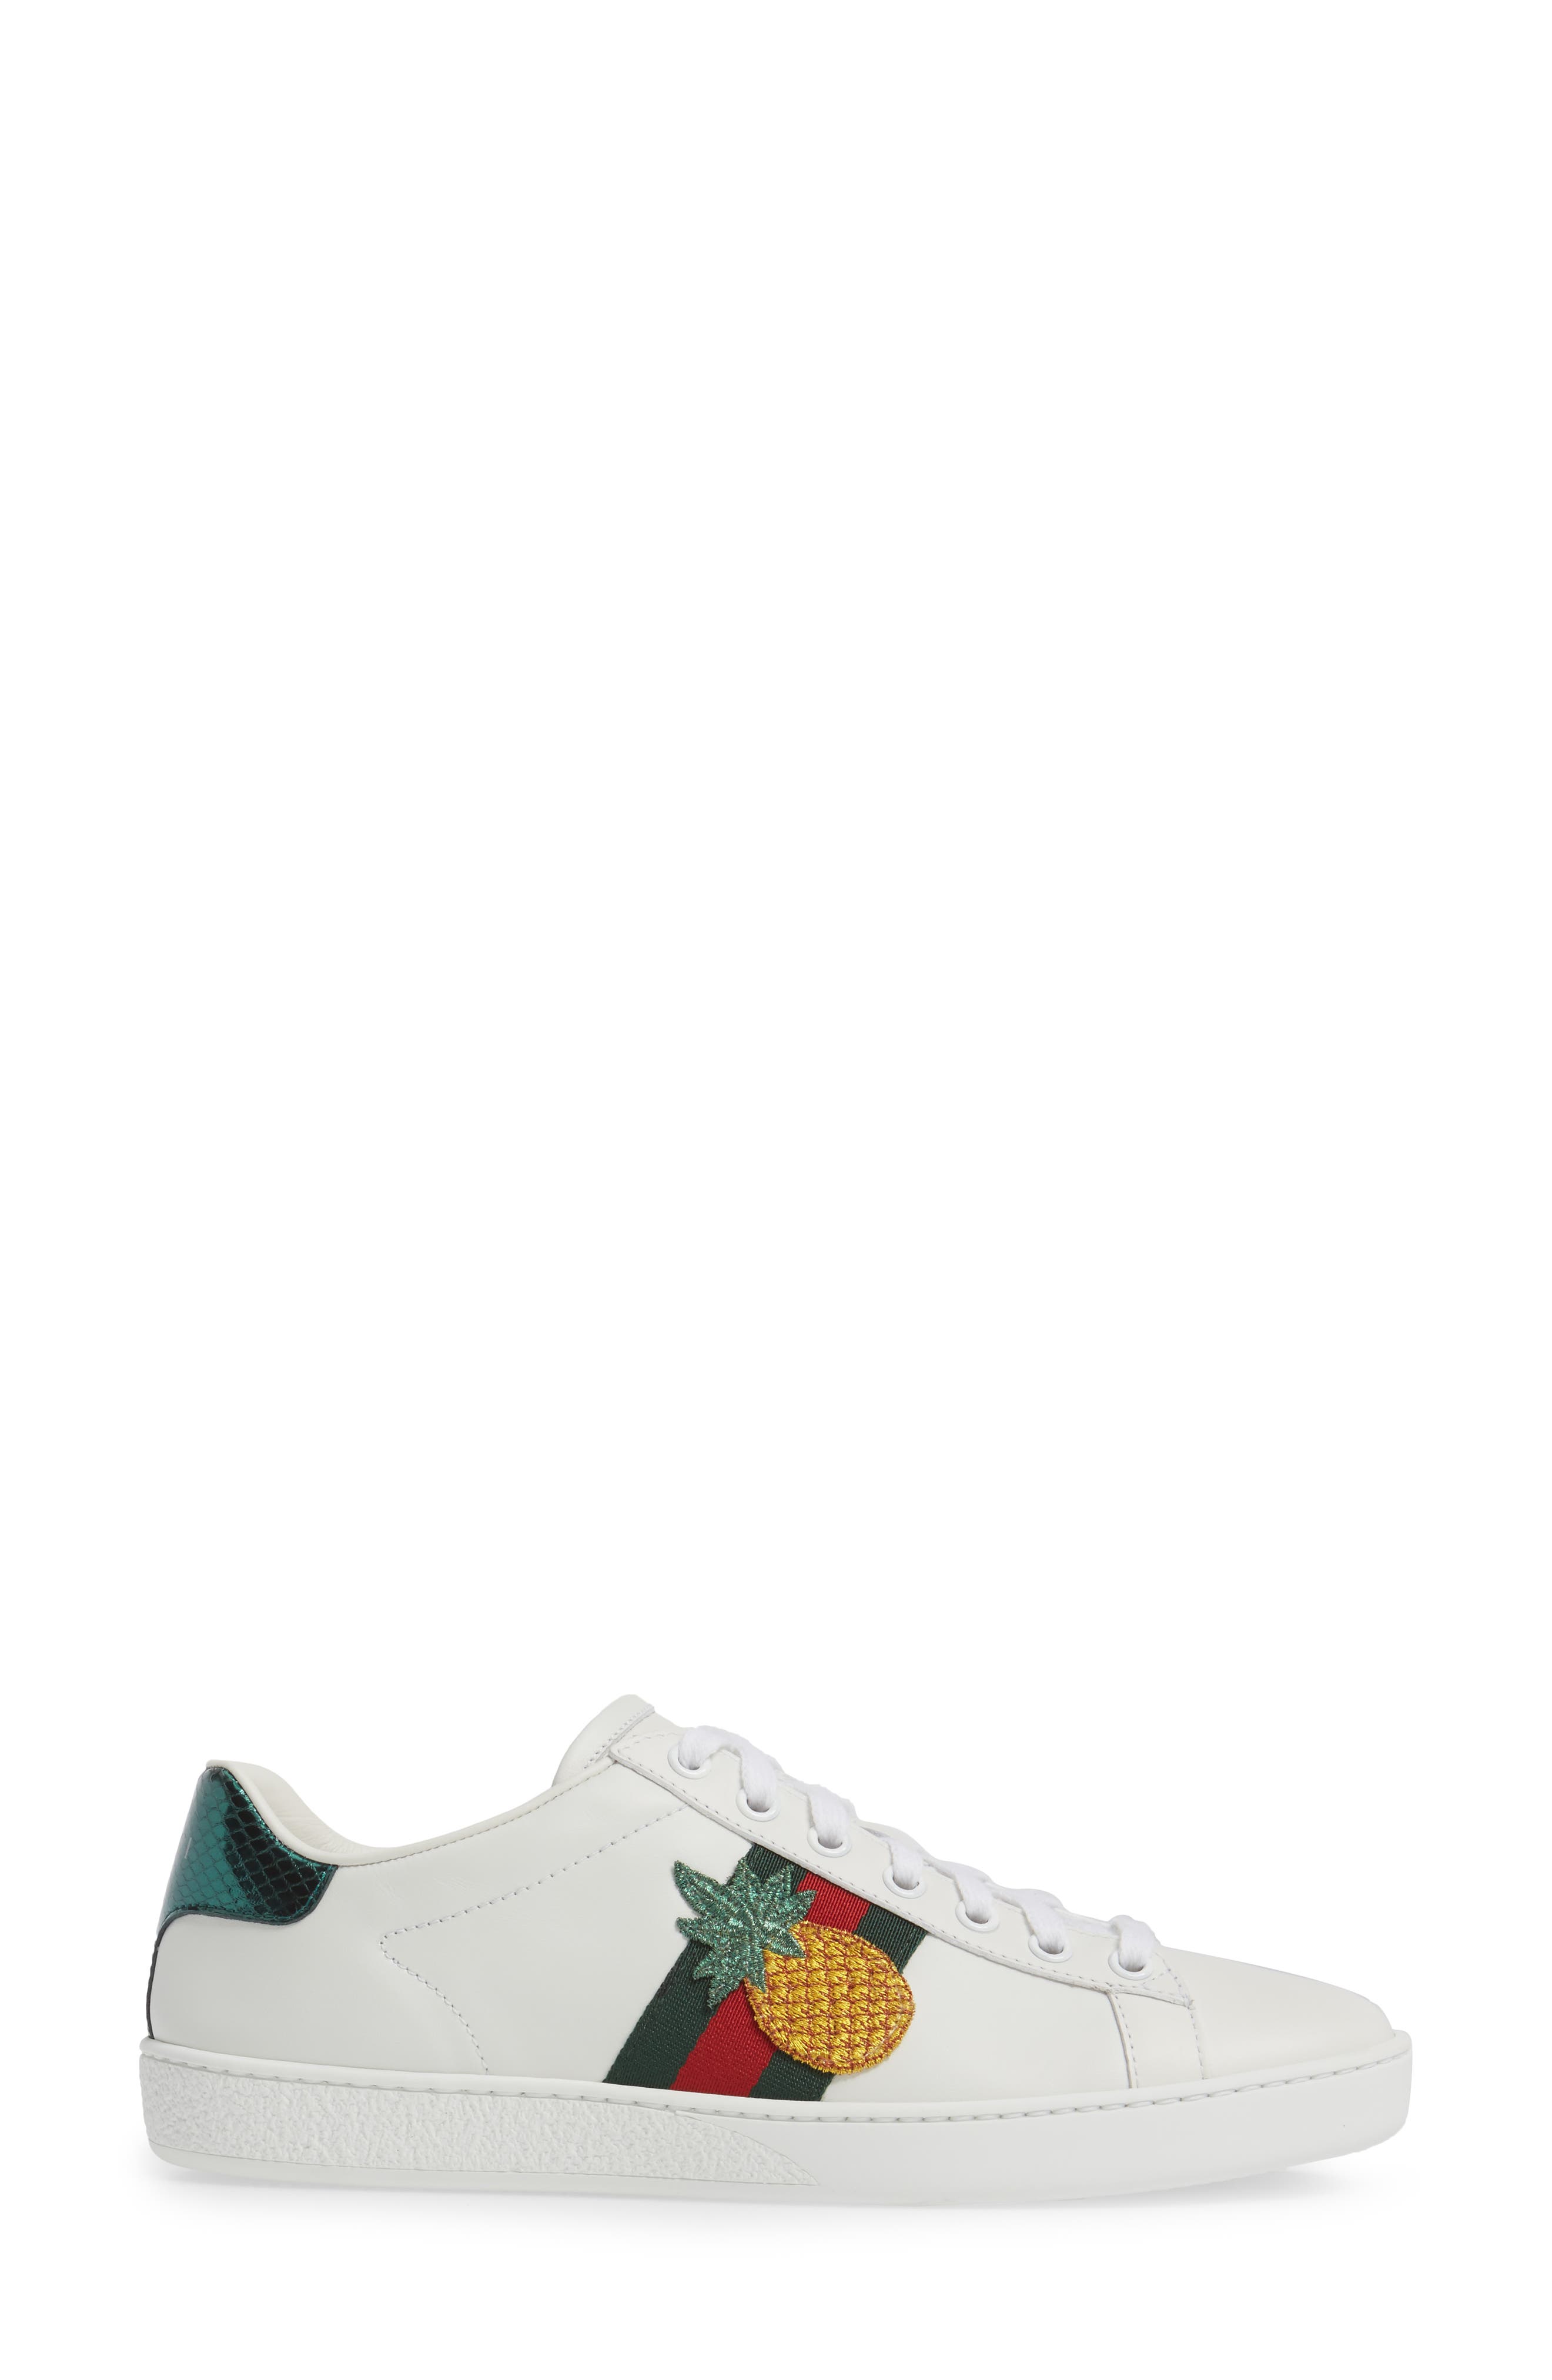 GUCCI New Ace Pineapple-Embellished Leather Trainers in White Leather ...